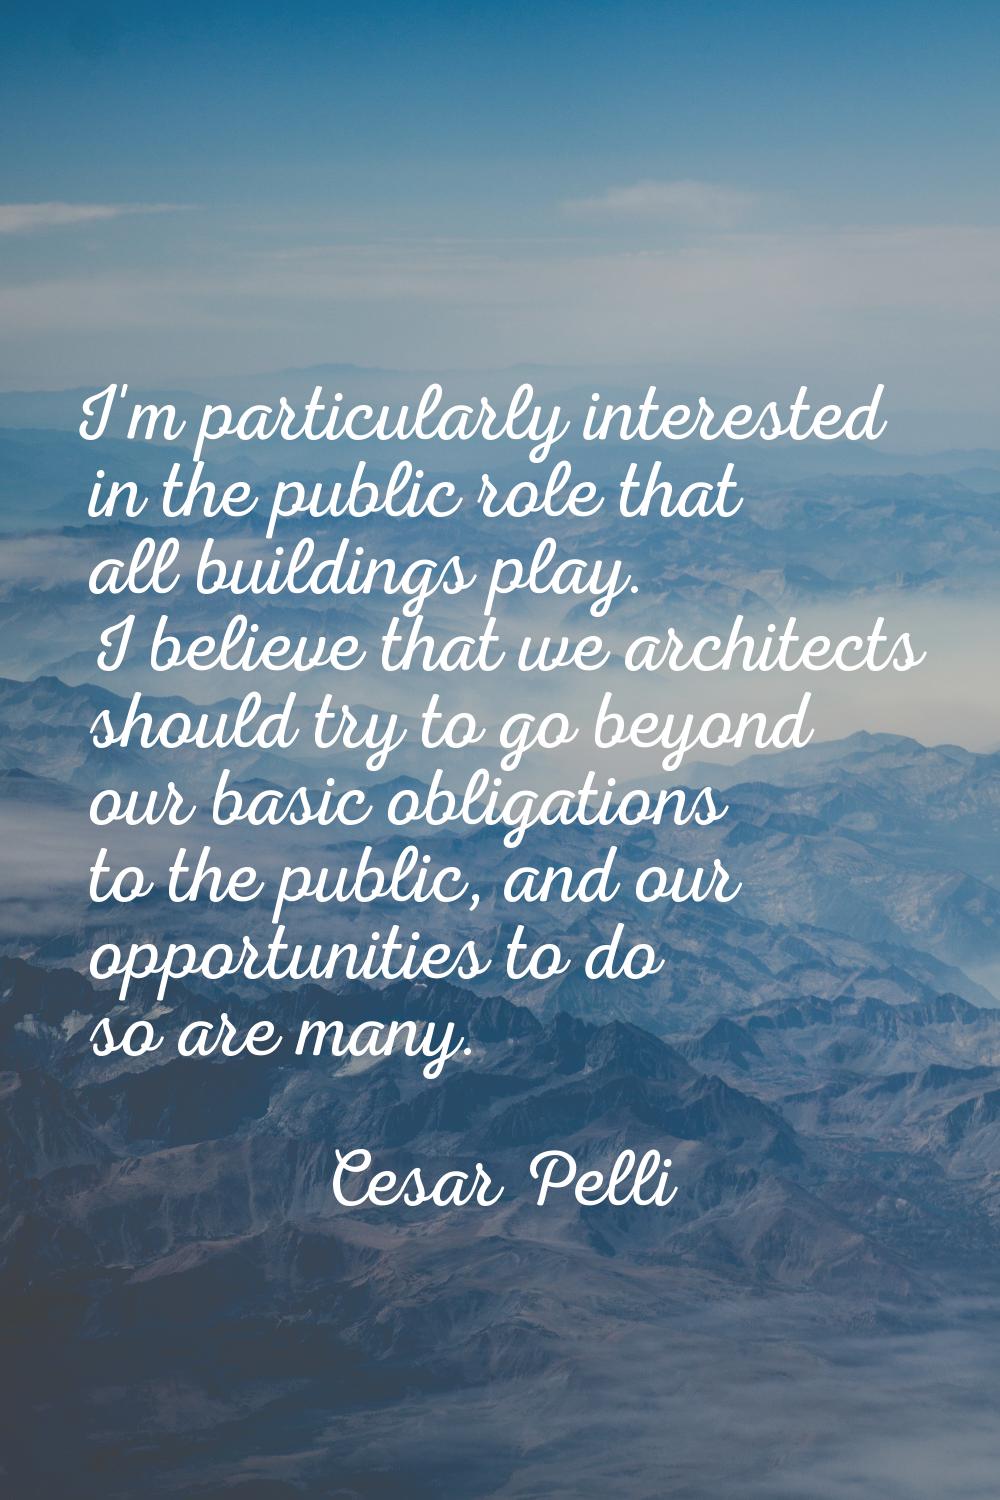 I'm particularly interested in the public role that all buildings play. I believe that we architect